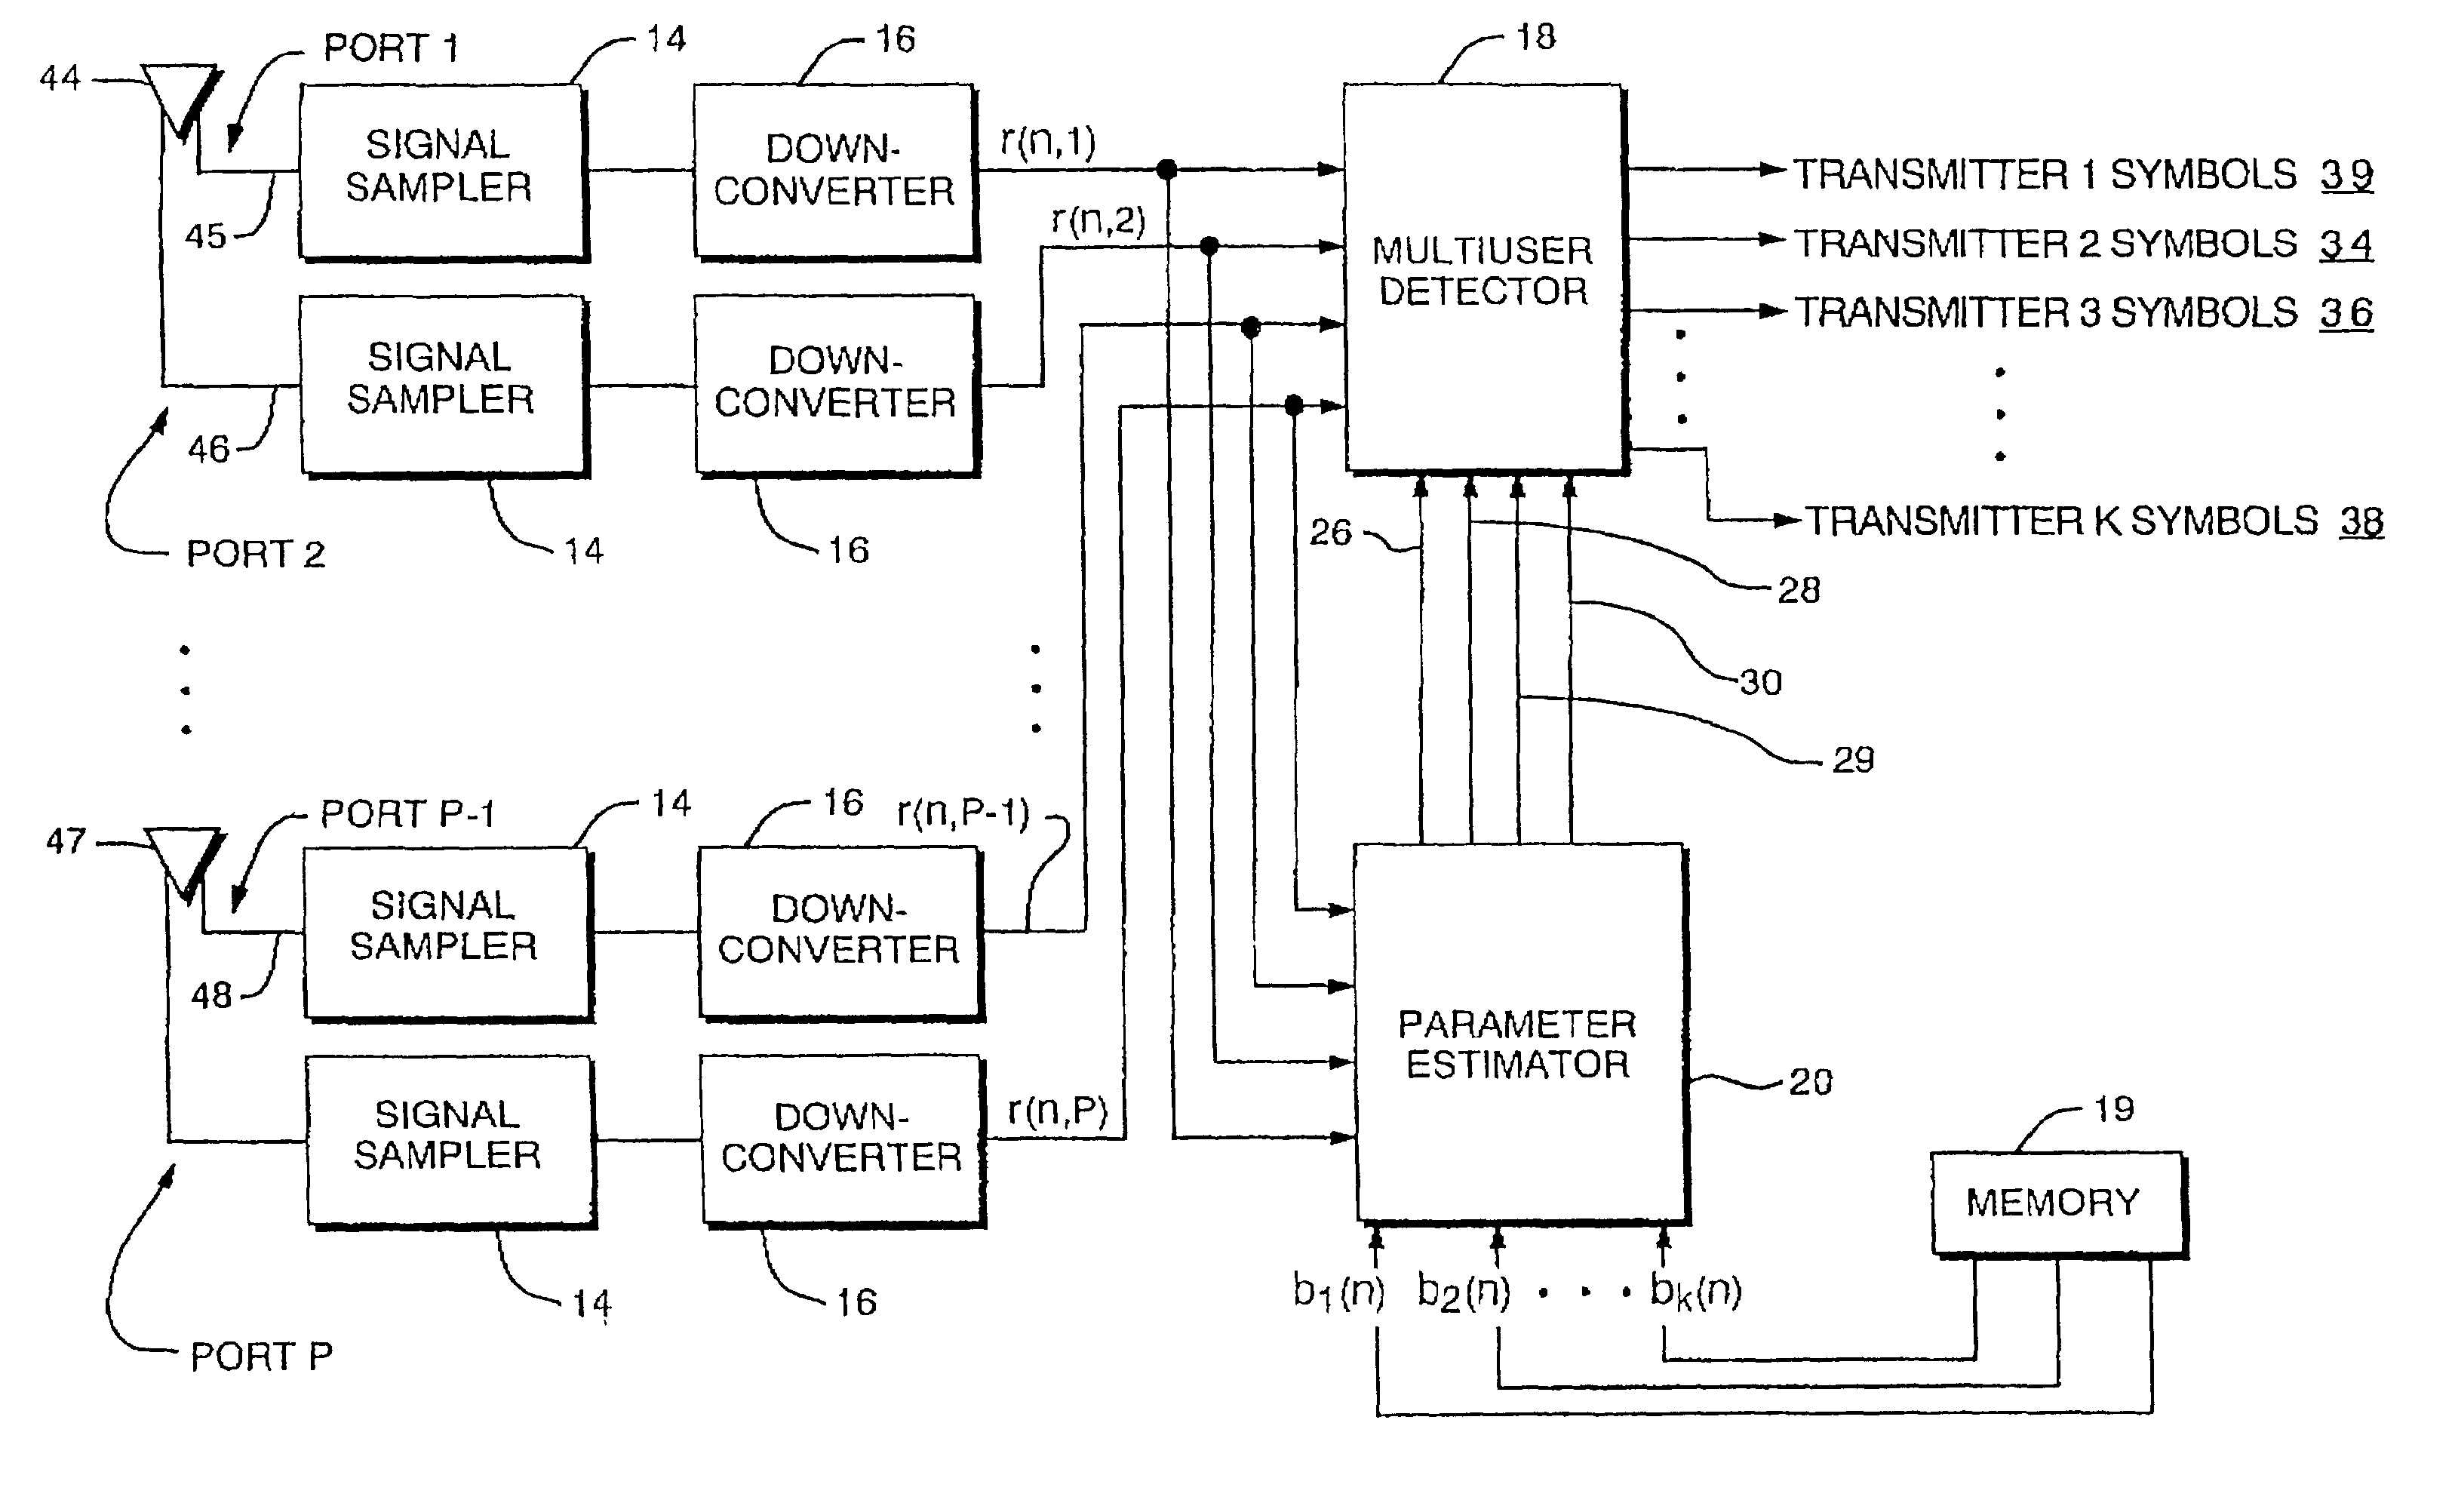 Co-channel interference receiver